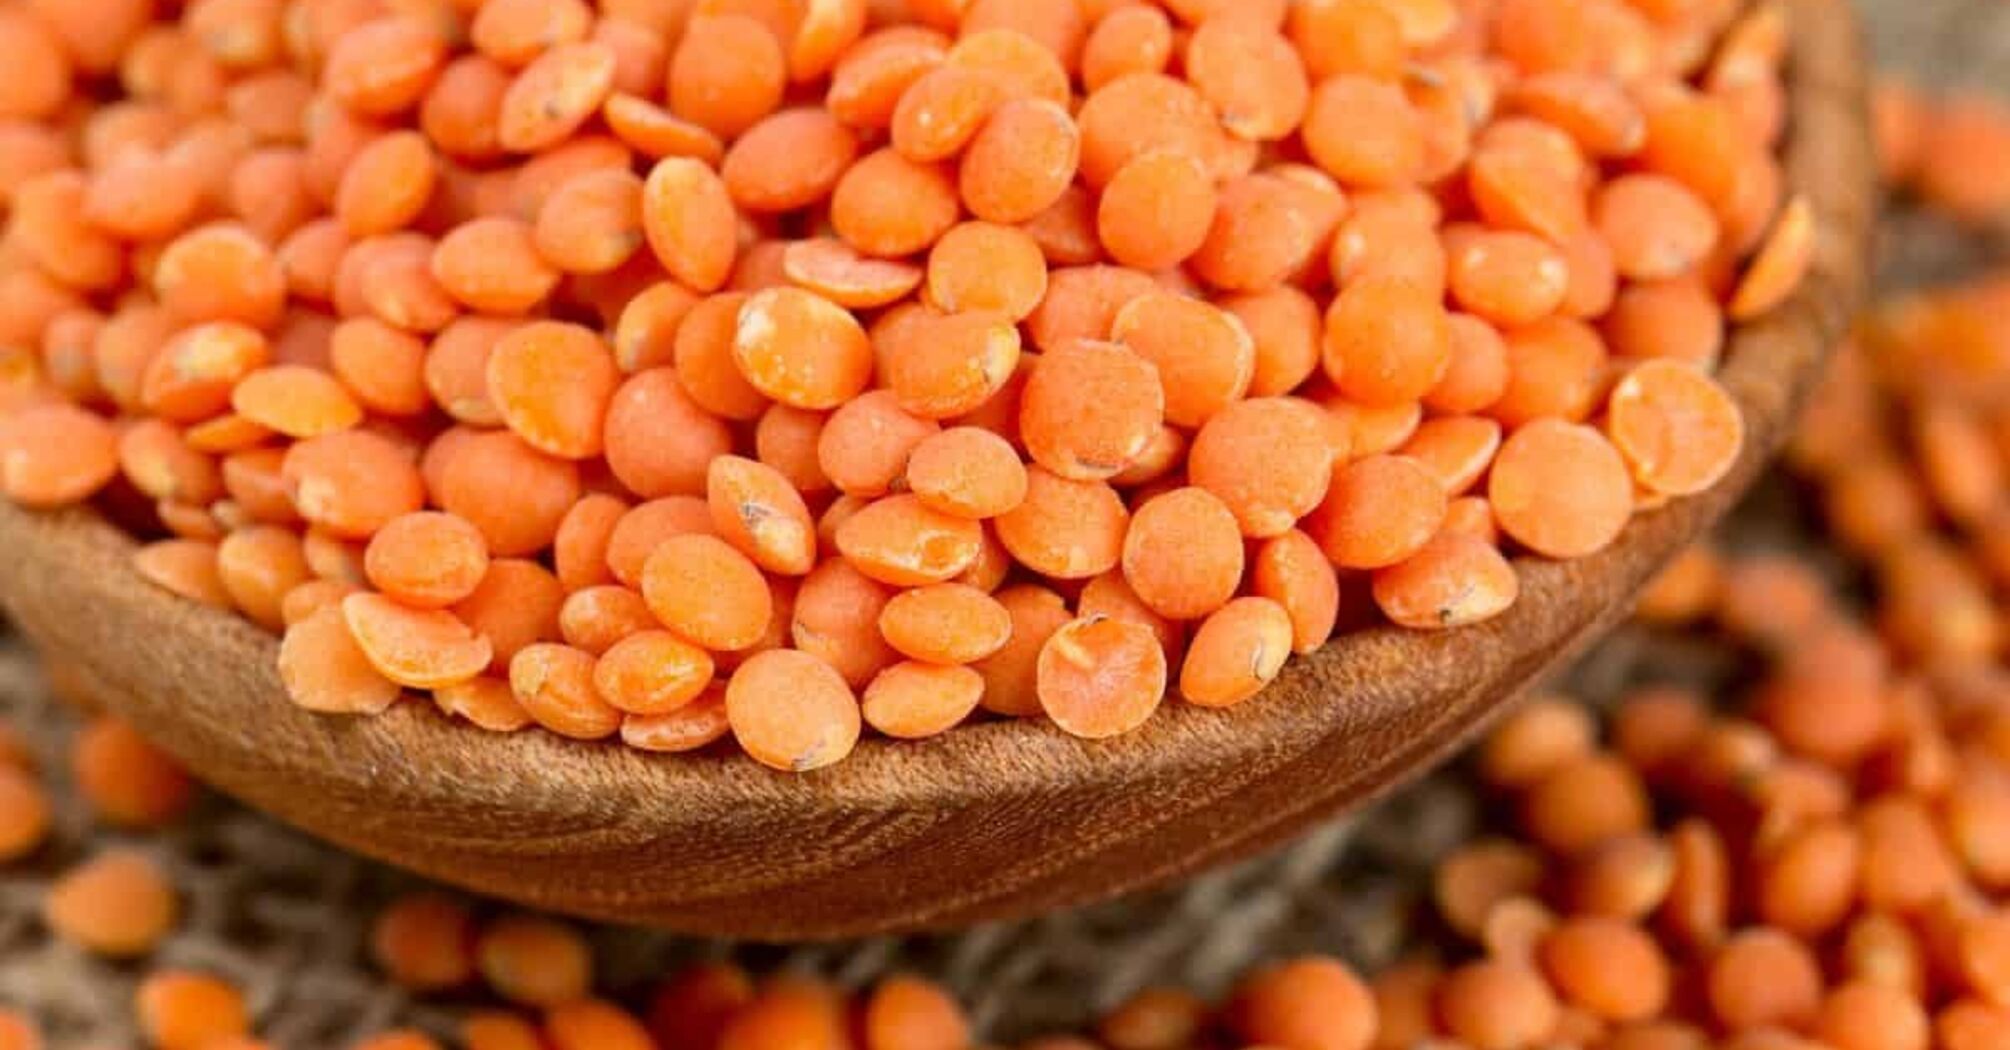 Crumbly red lentils